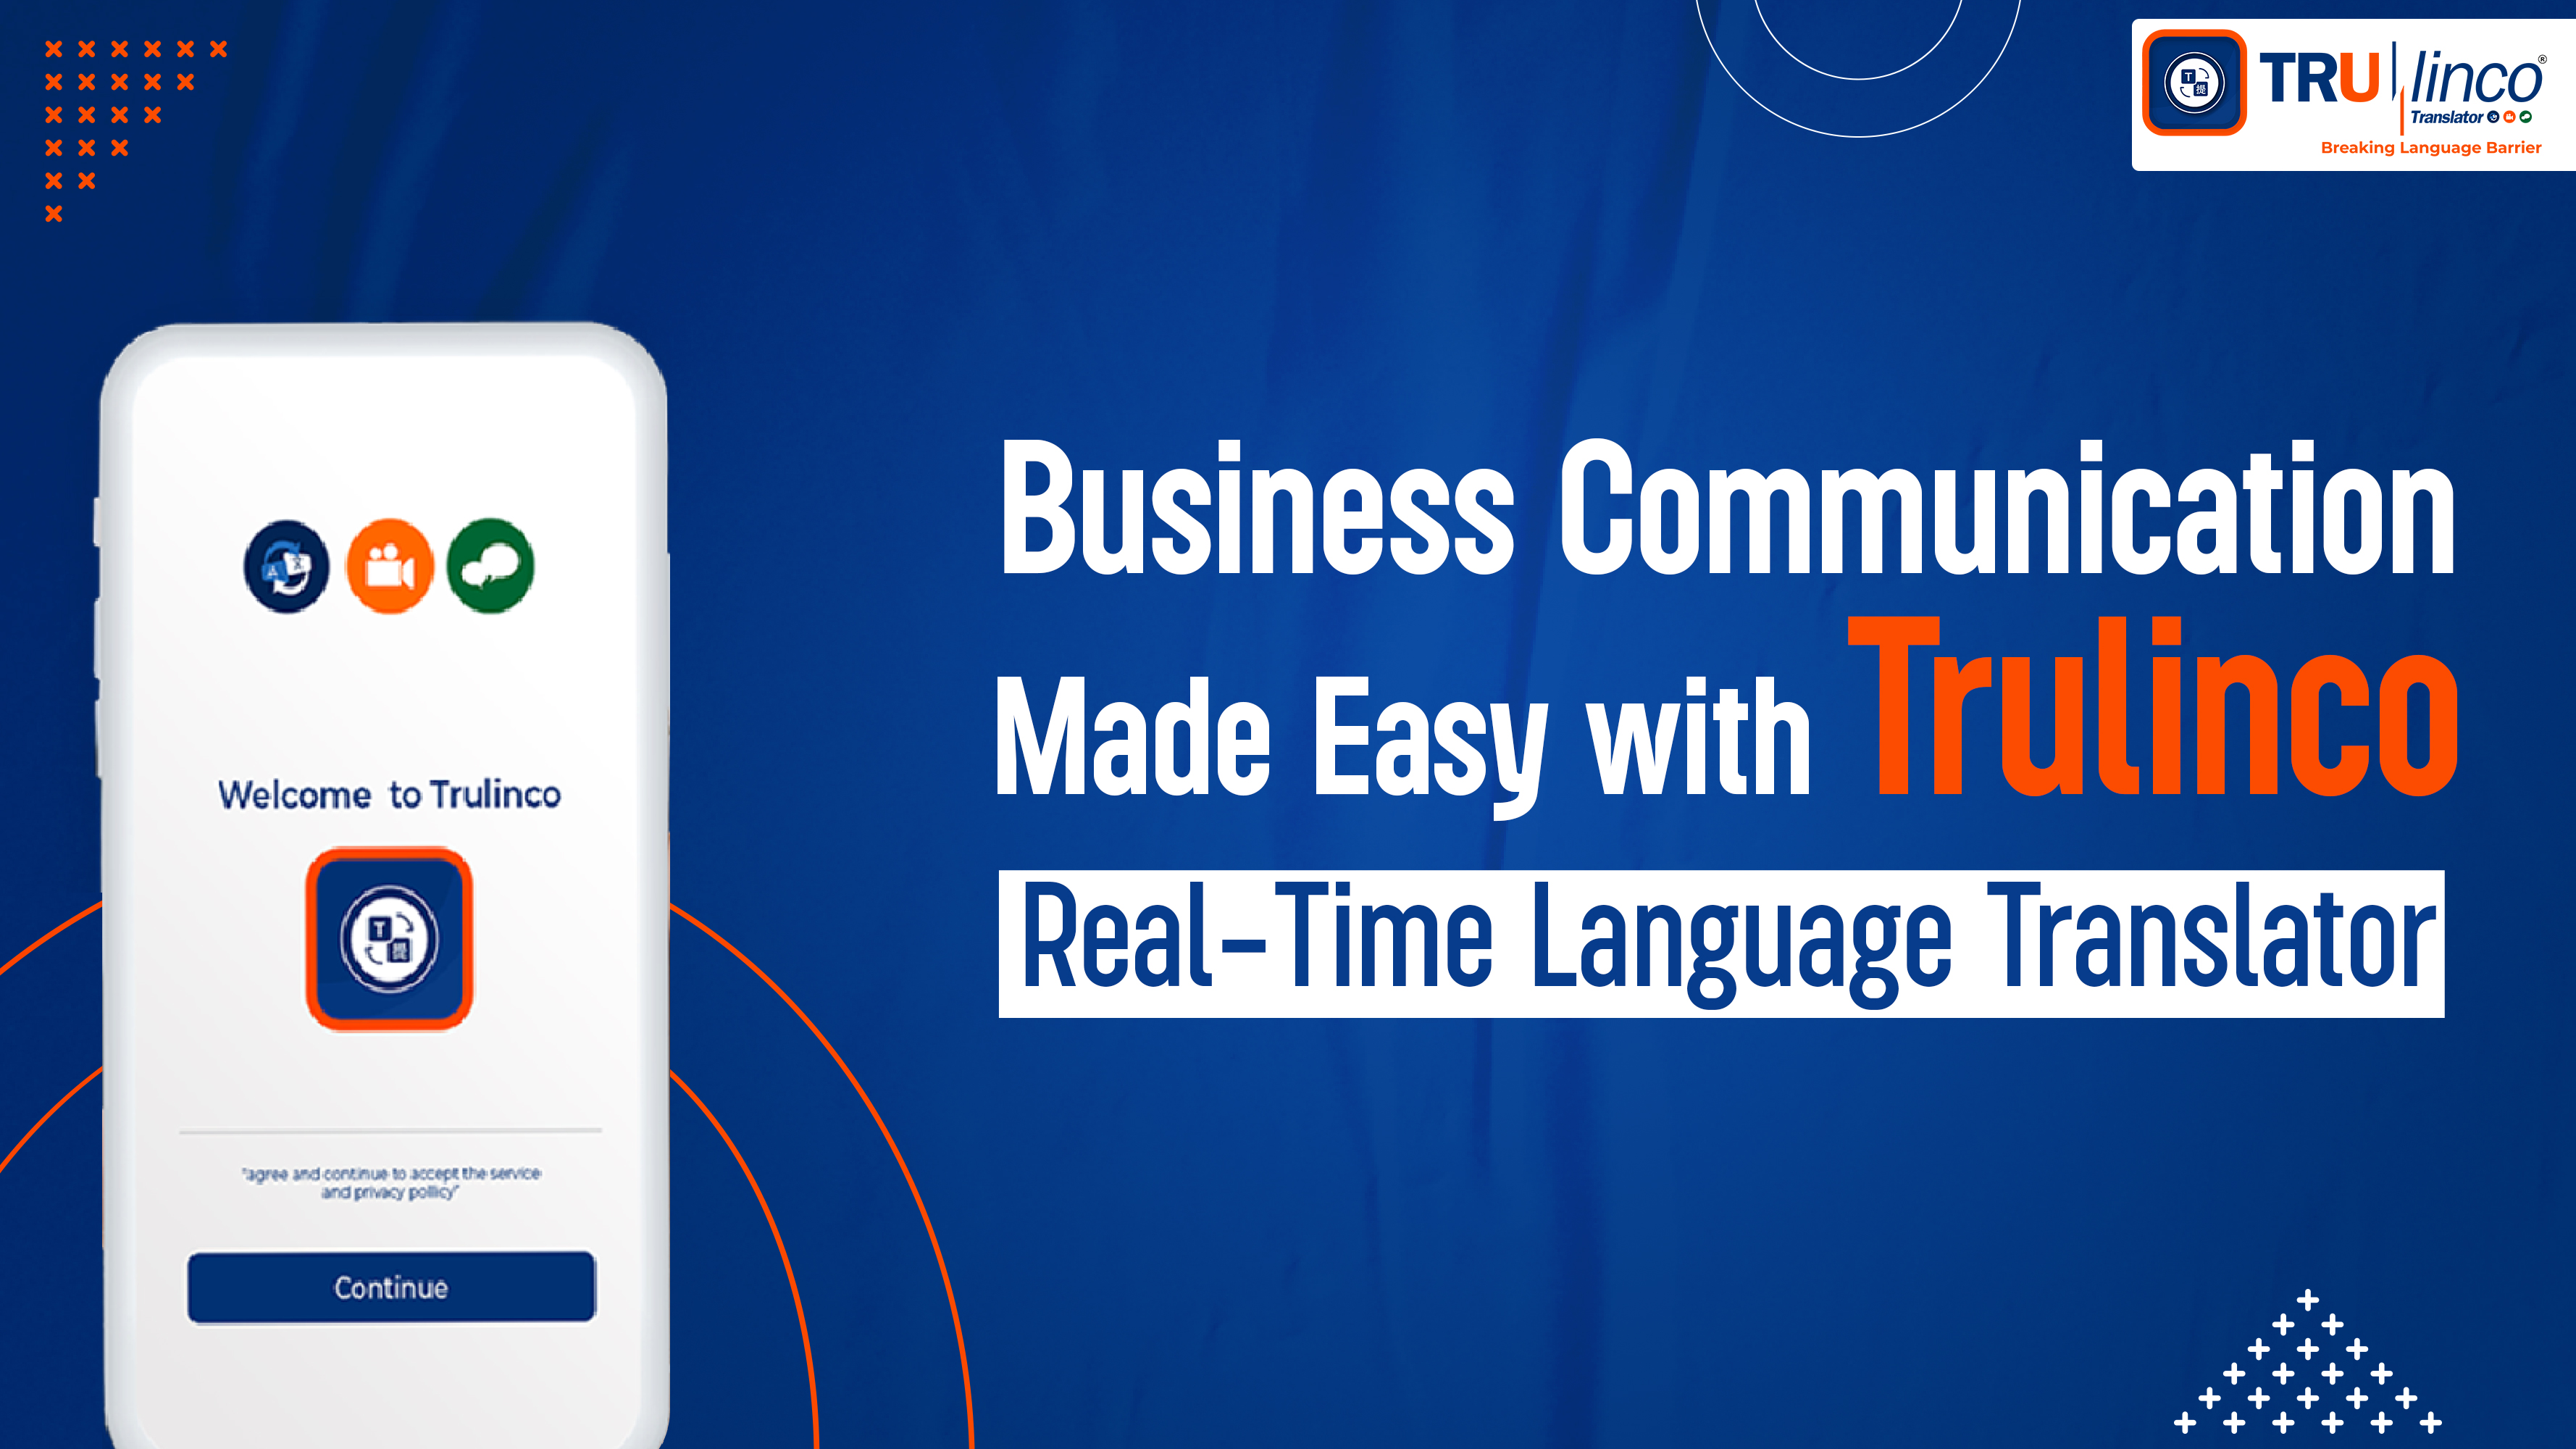 Business Communication Made Easy with Trulinco Real-Time Language Translator